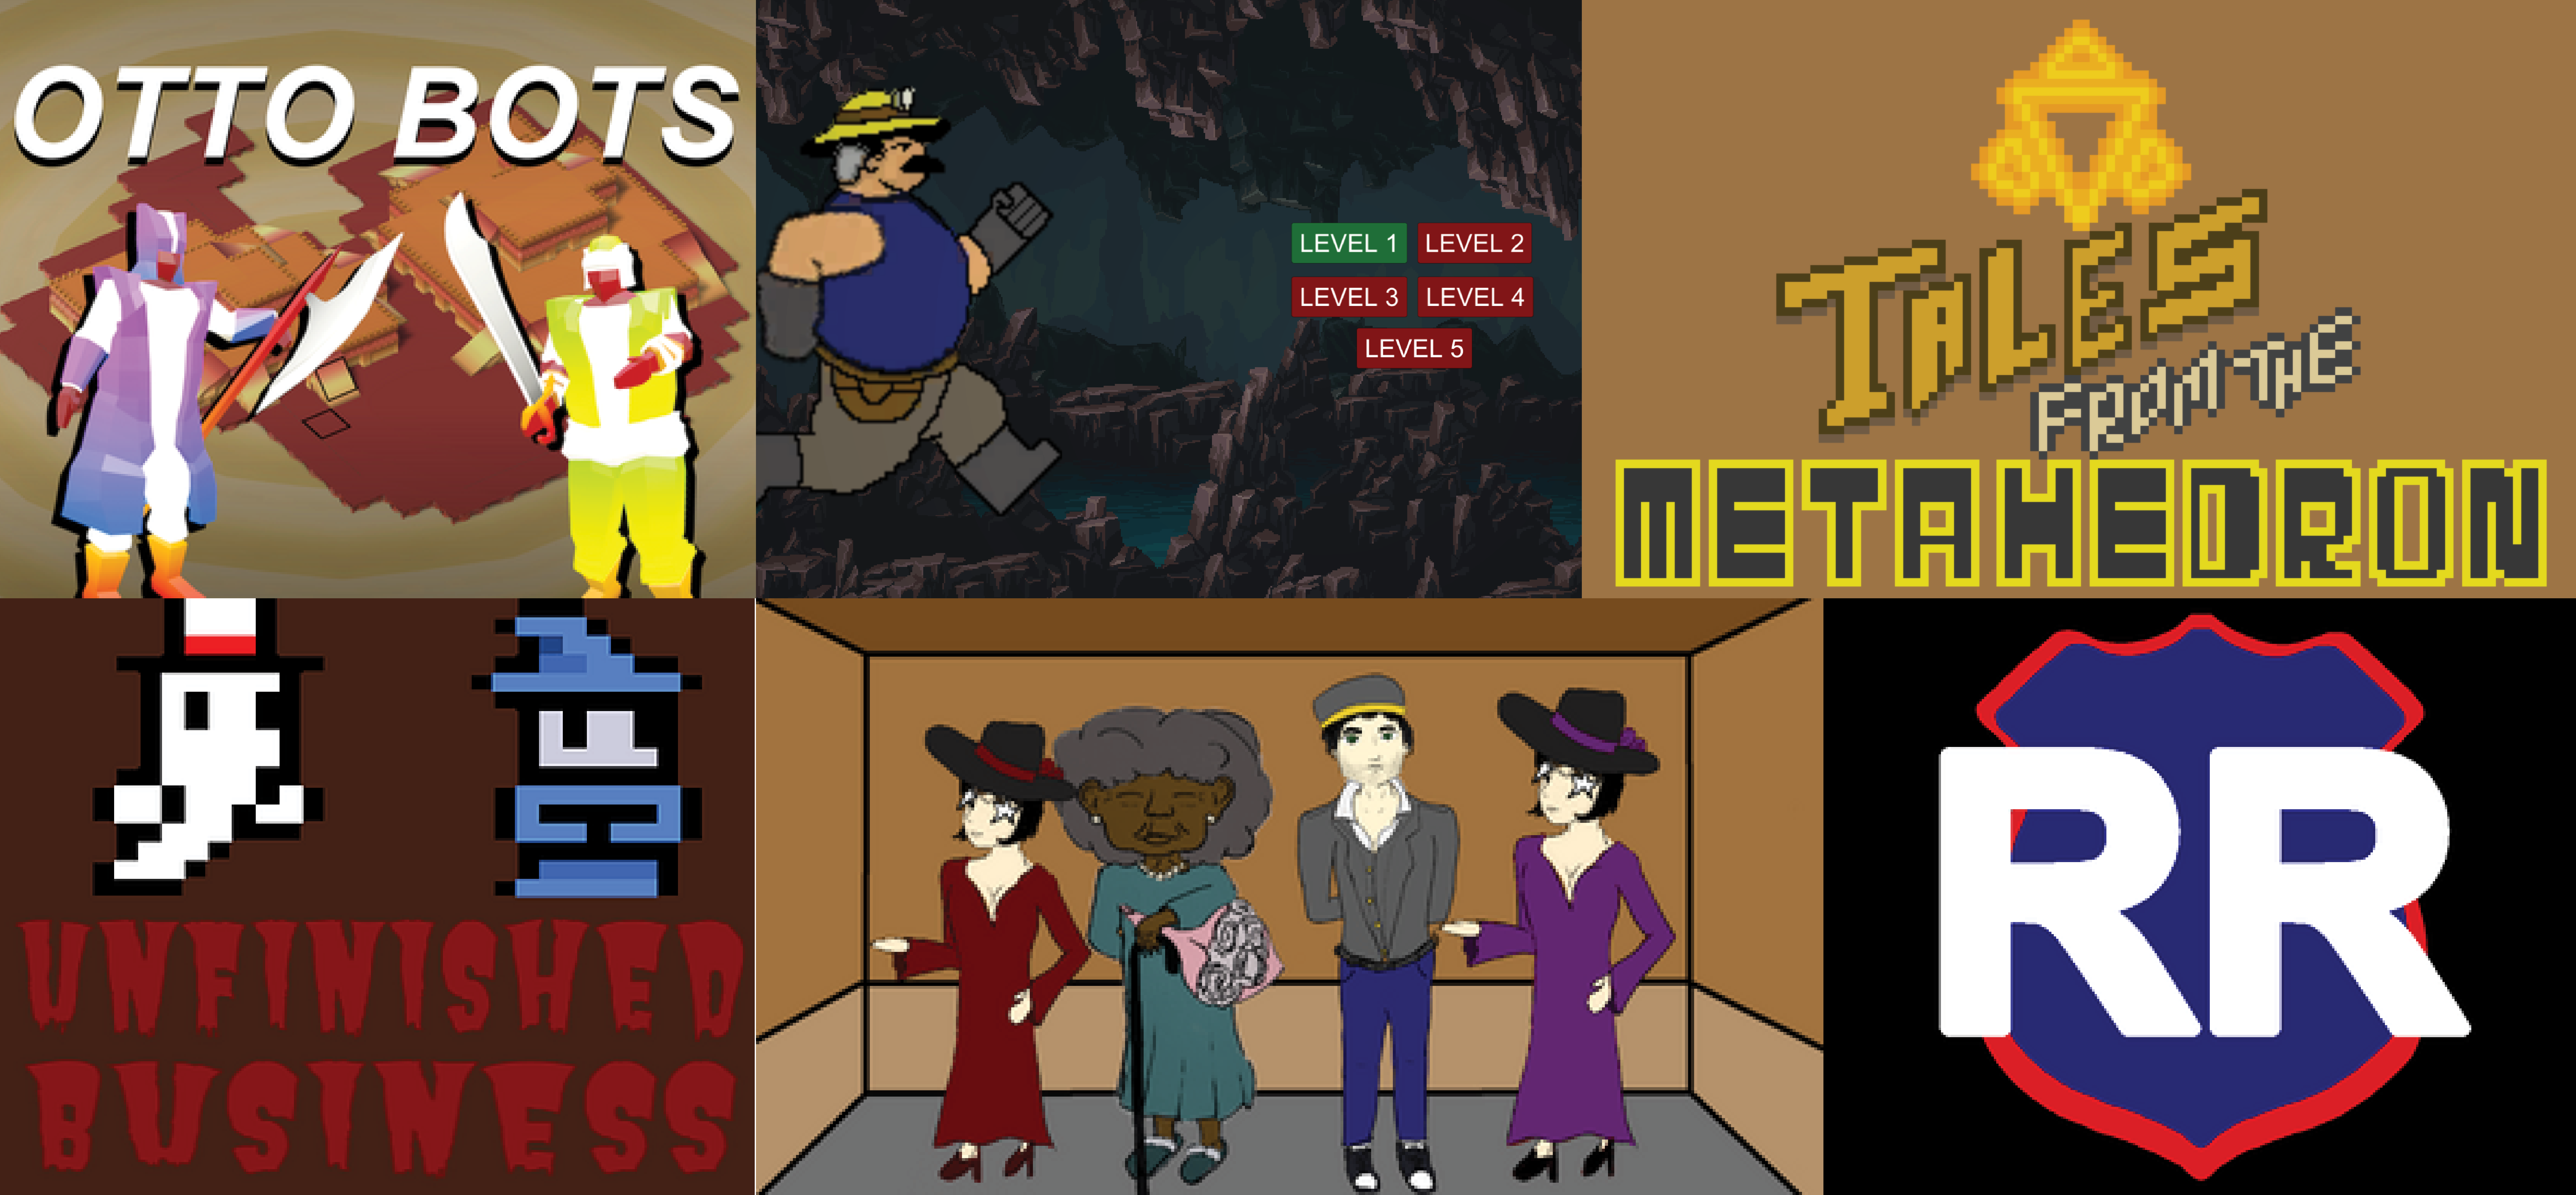 Top row left to right: Otto Bots, Things Go Bump in the Night, Tales from the Metahedron. Bottom row left to right: Unfinished Business, Riot Relief, Levels of Mystery.